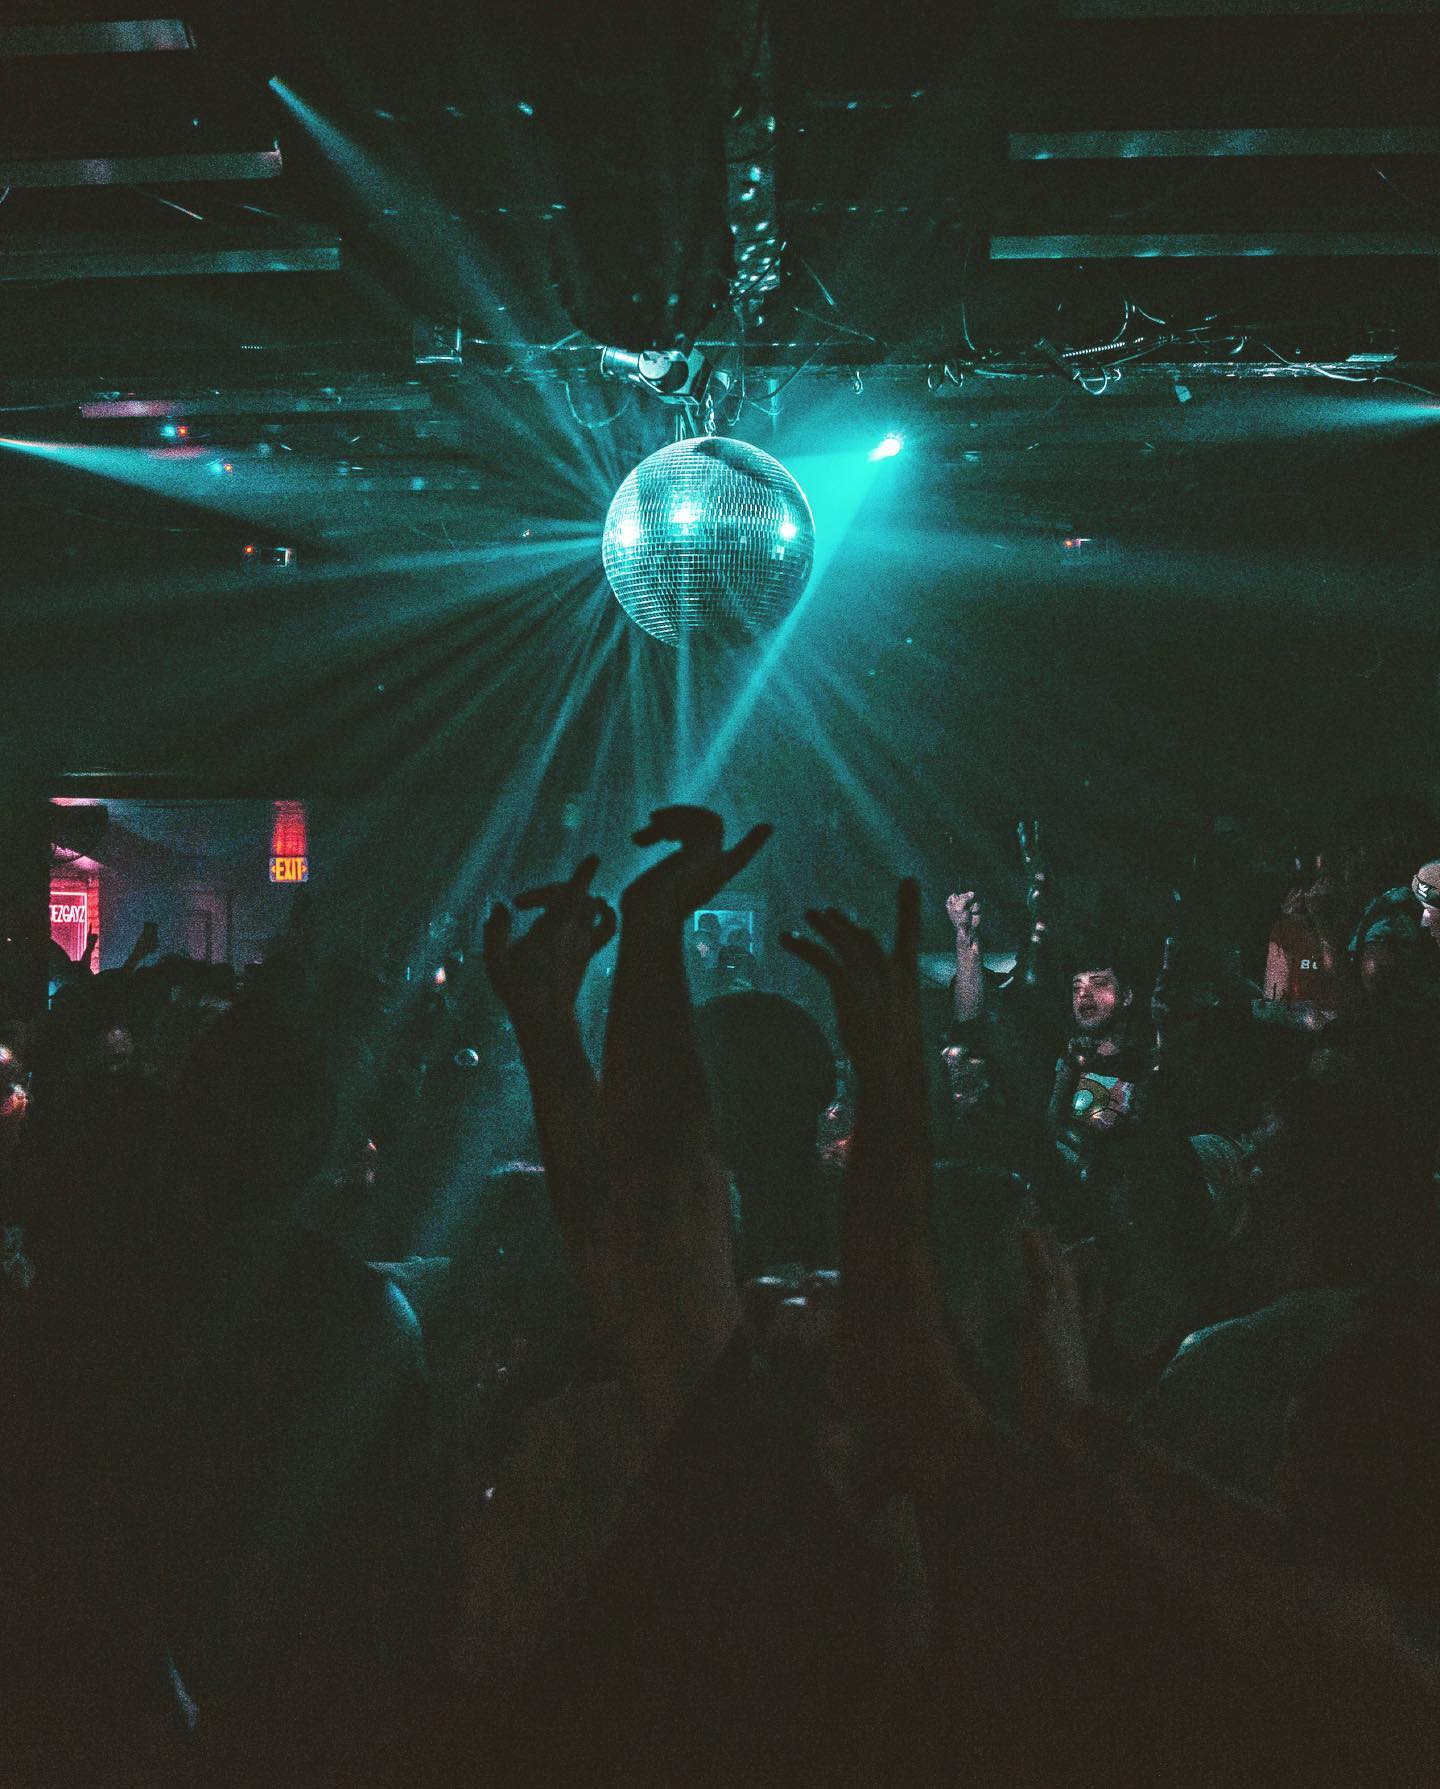 A lit-up disco ball above a dark crowded dance floor.